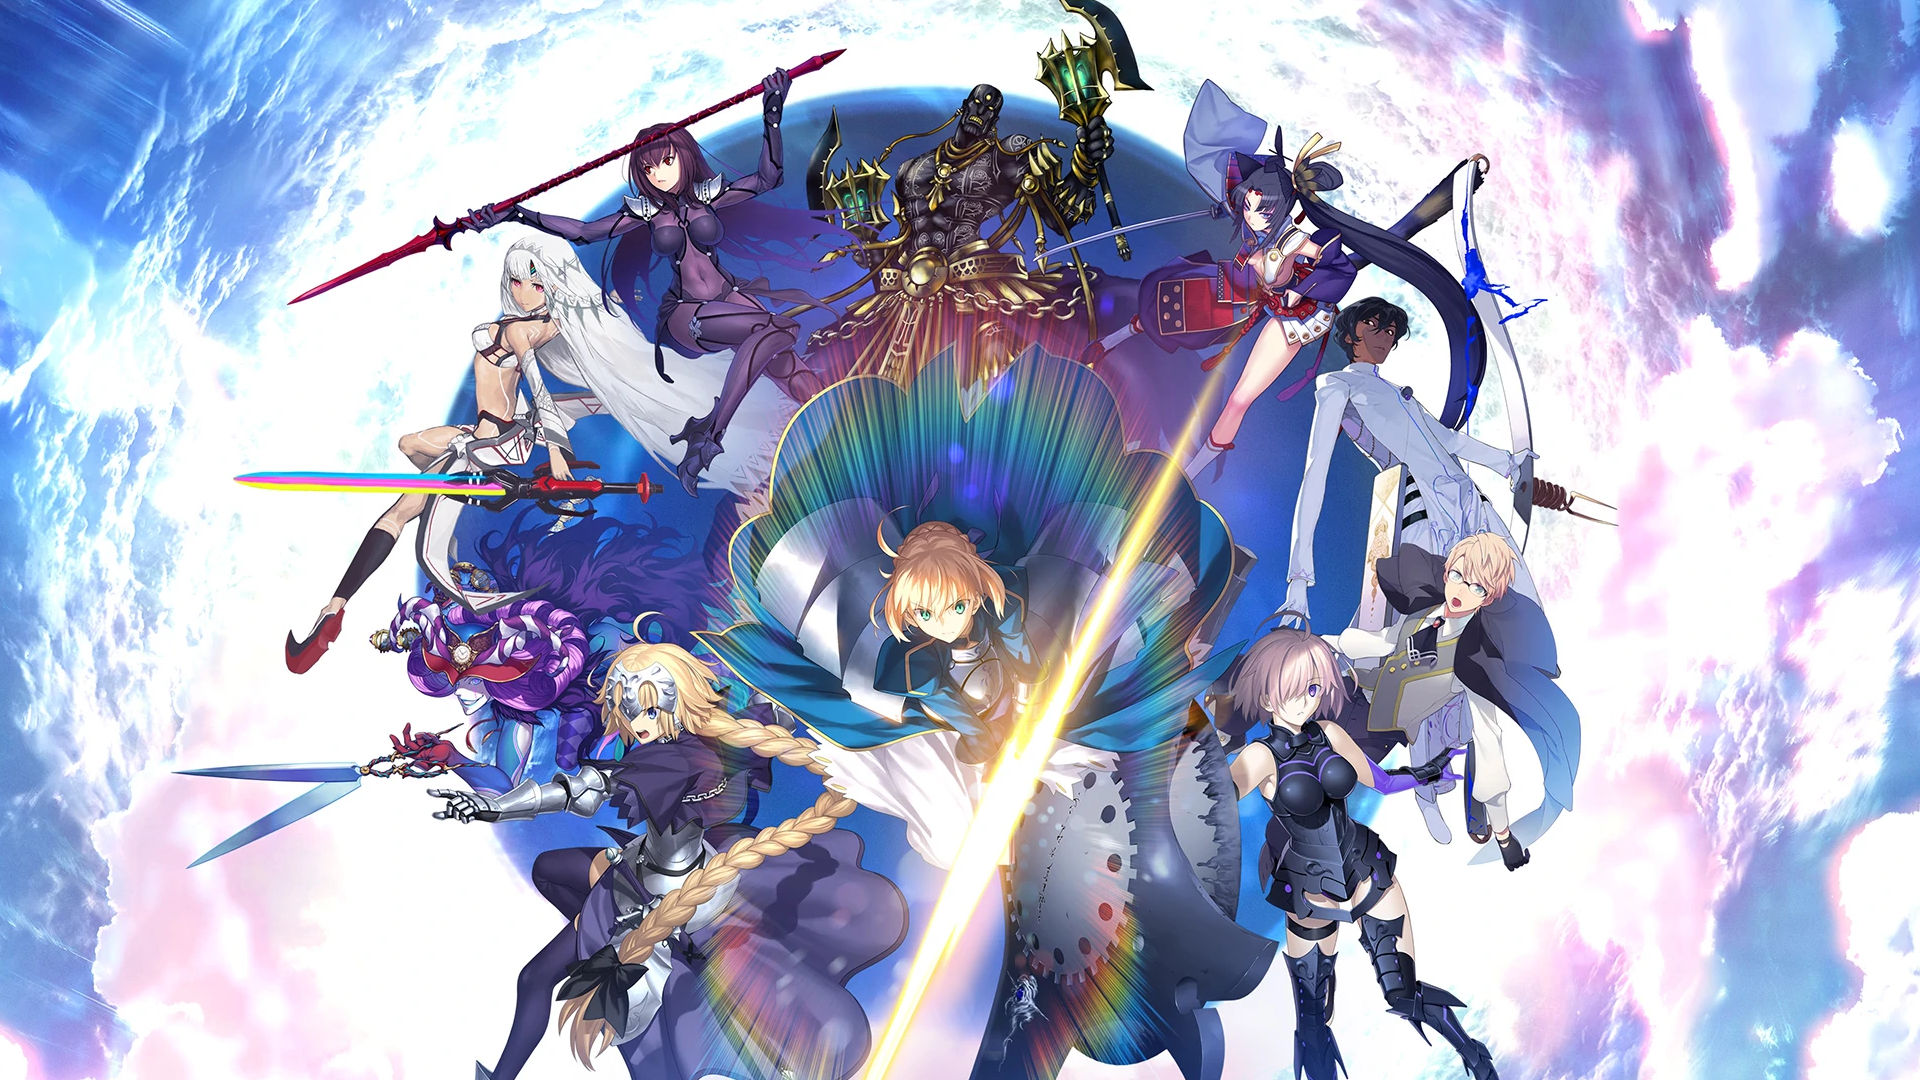 Fate Grand Order tier list and reroll guide